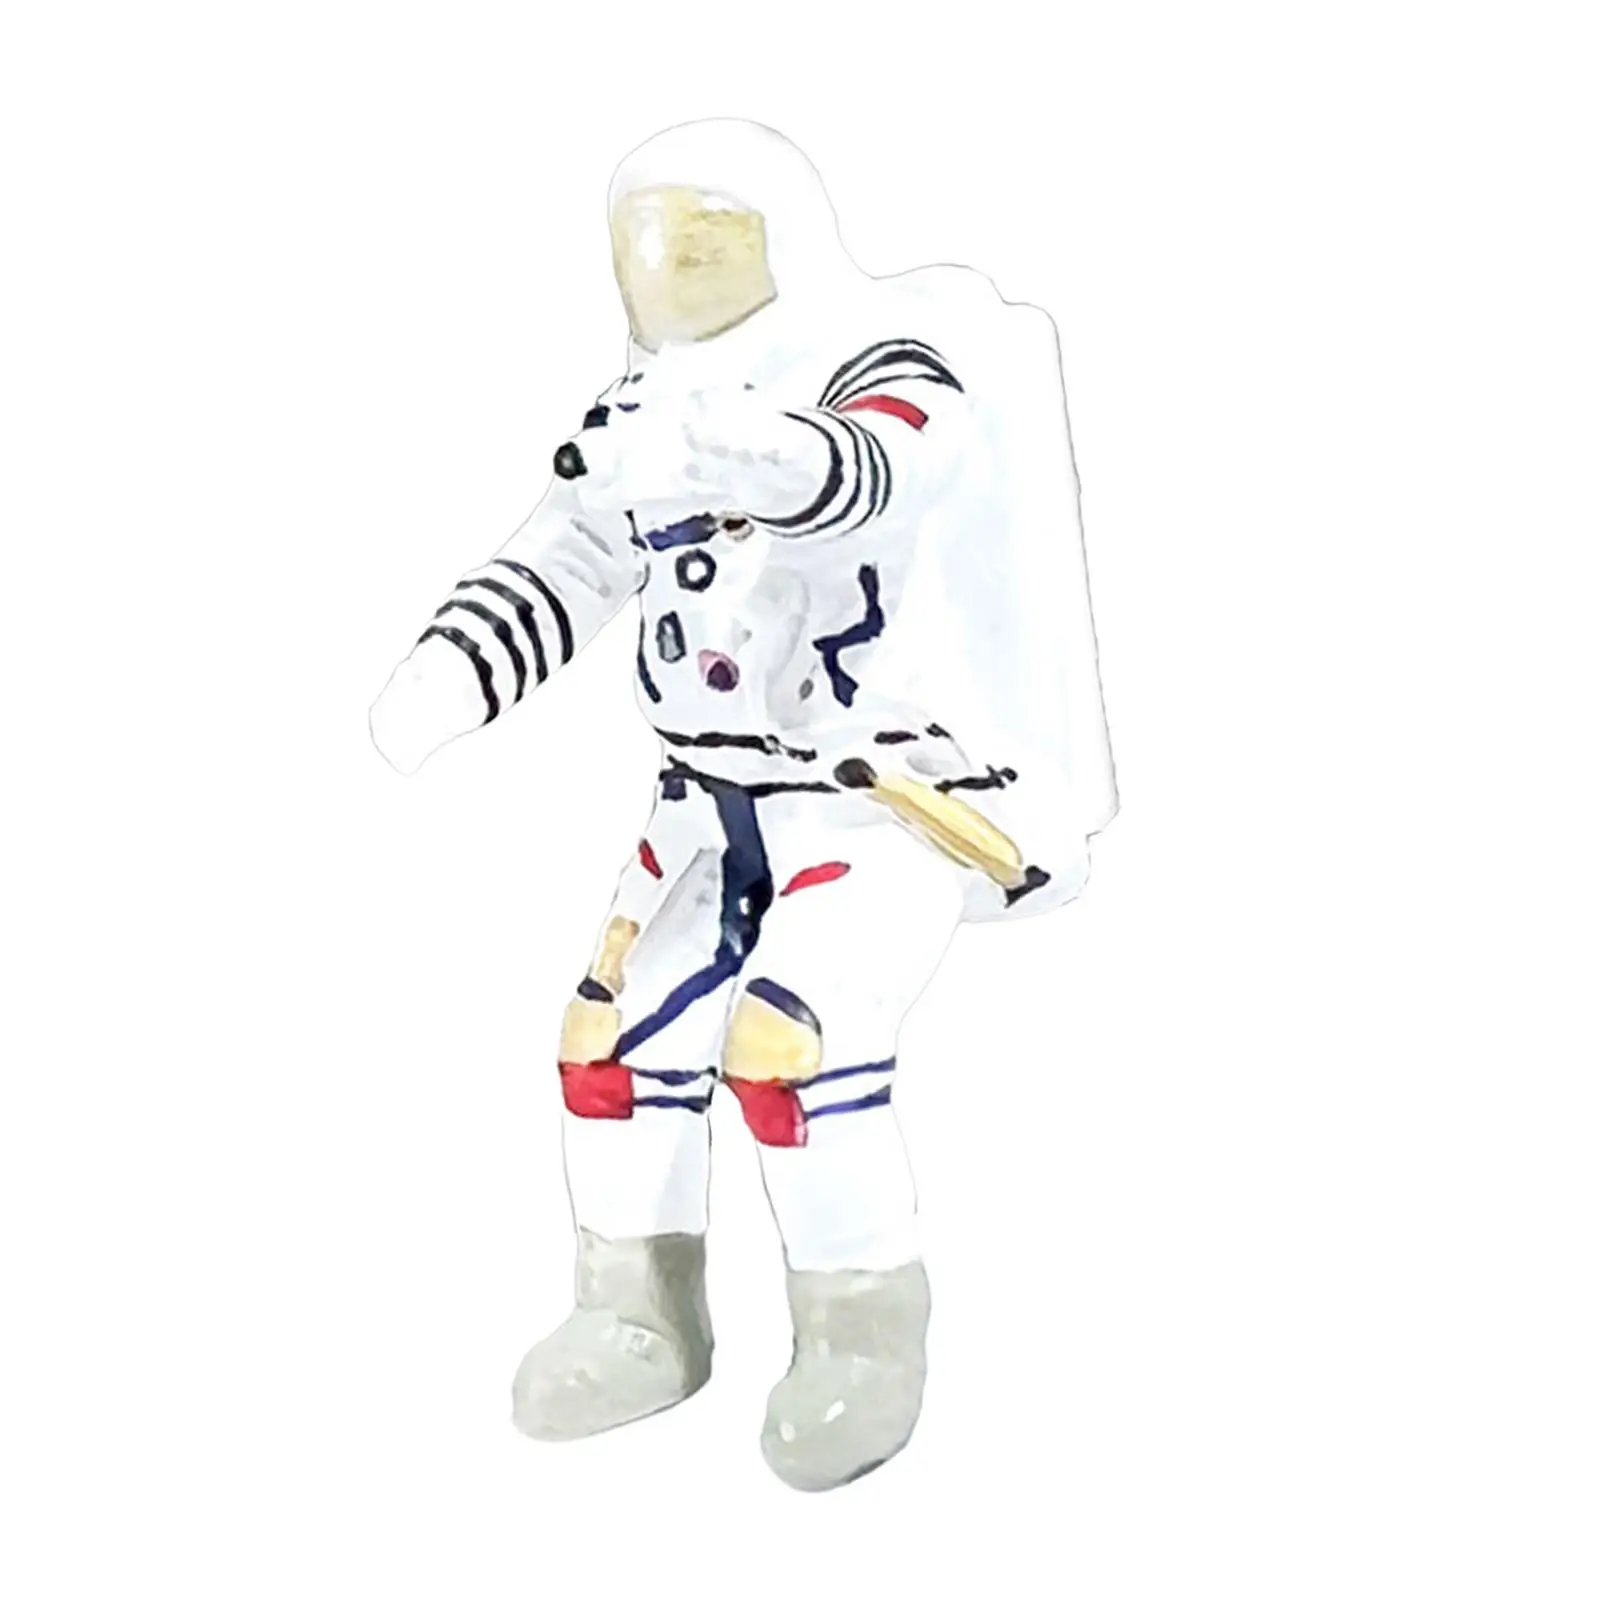 1/64 Astronaut Figurines Hand Painted Statue Miniature Astronaut Action Figure for Scenery Landscape Photography Props Layout